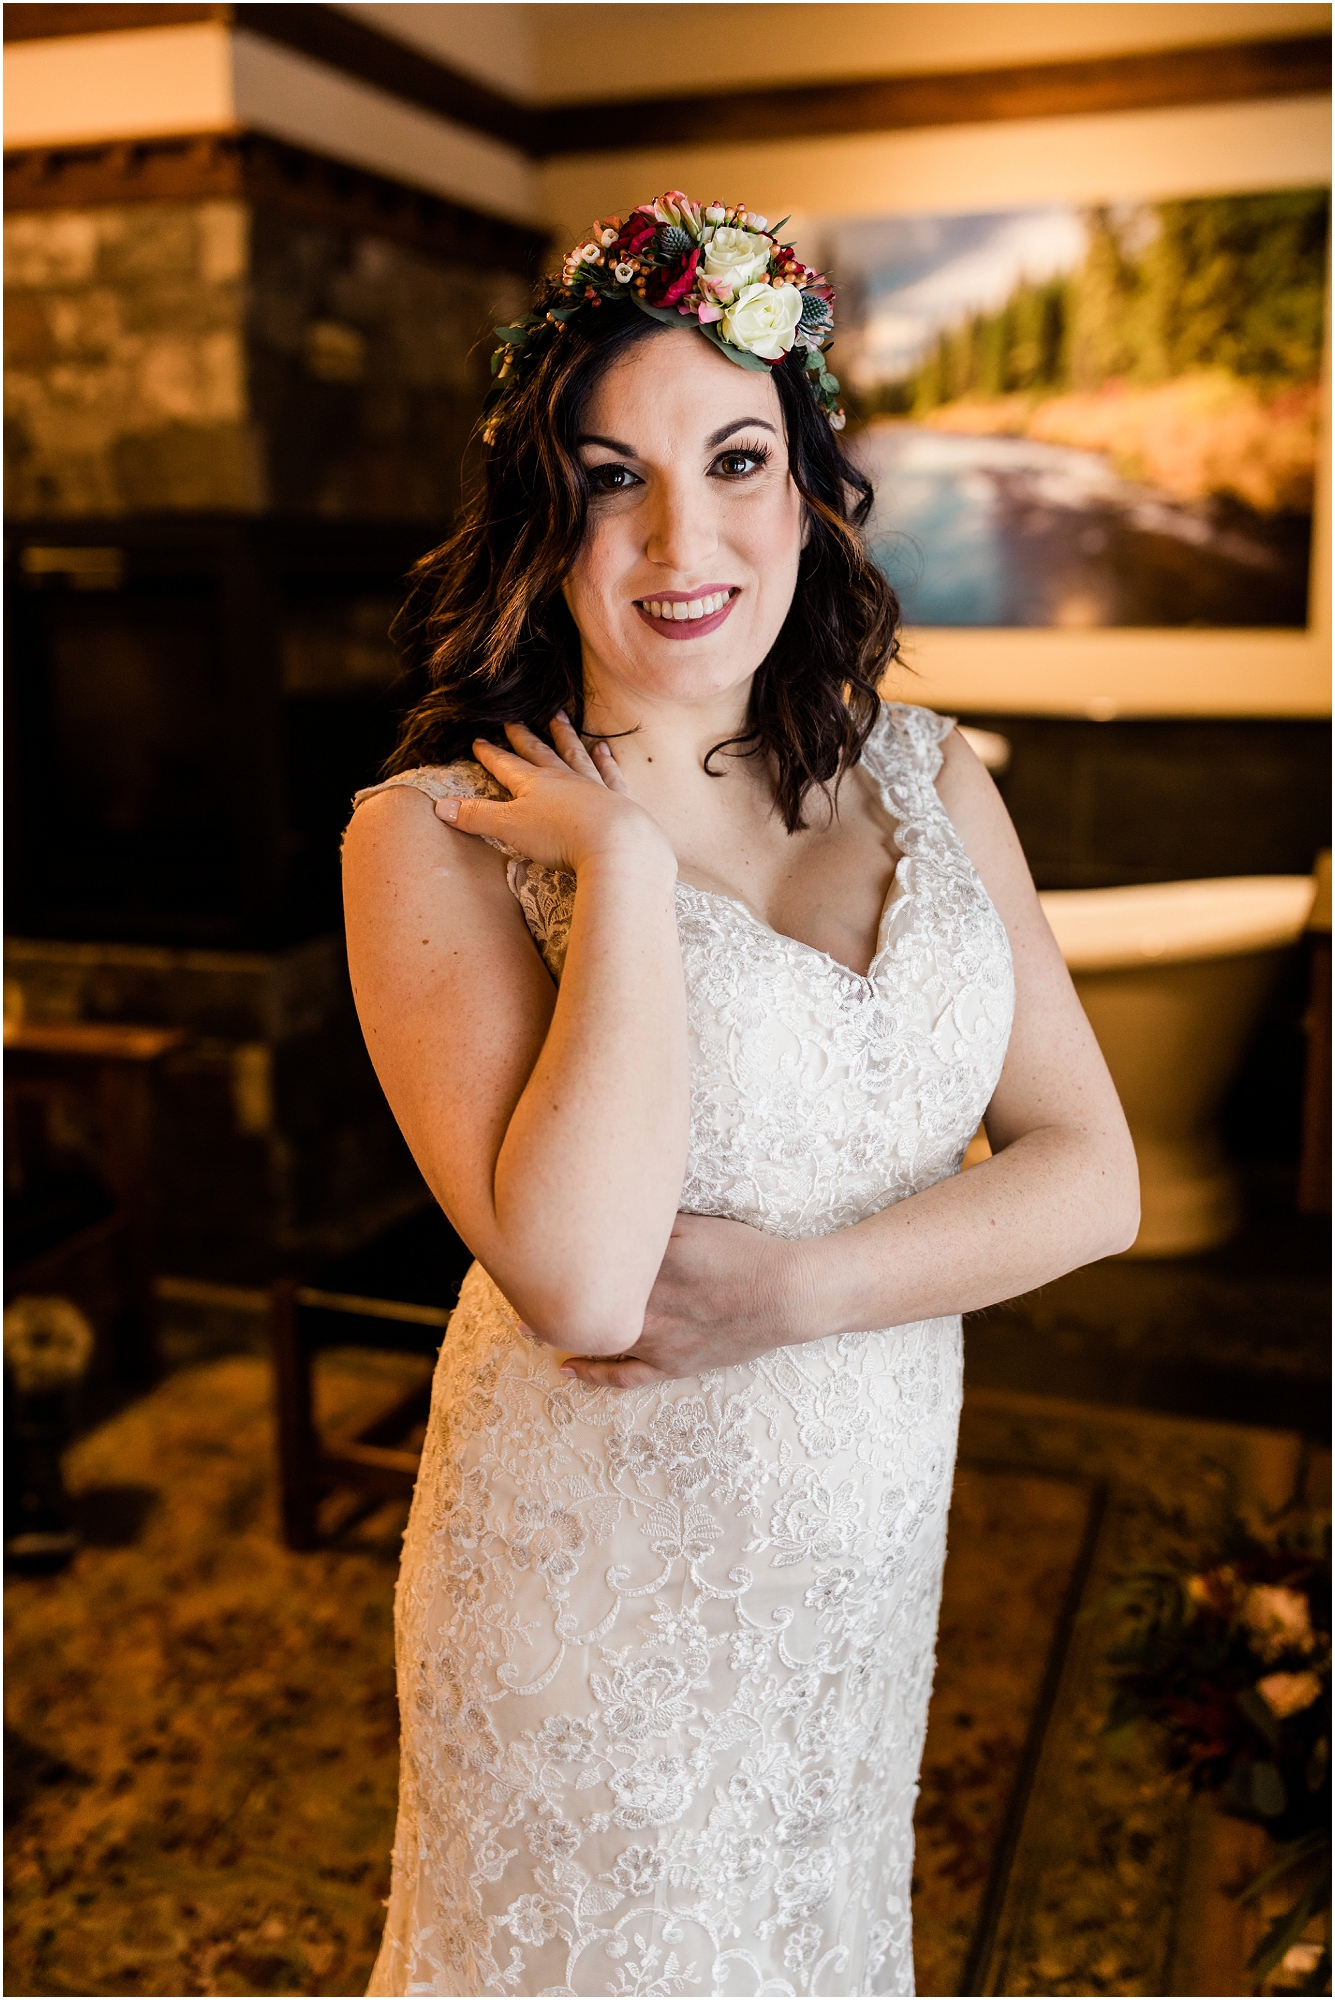 A gorgeous bride with a floral crown poses with her hand resting on her shoulder as she gets ready to see her groom for the first look outside her cabin door at Five Pine Lodge for her Central Oregon winter elopement. | Erica Swantek Photography